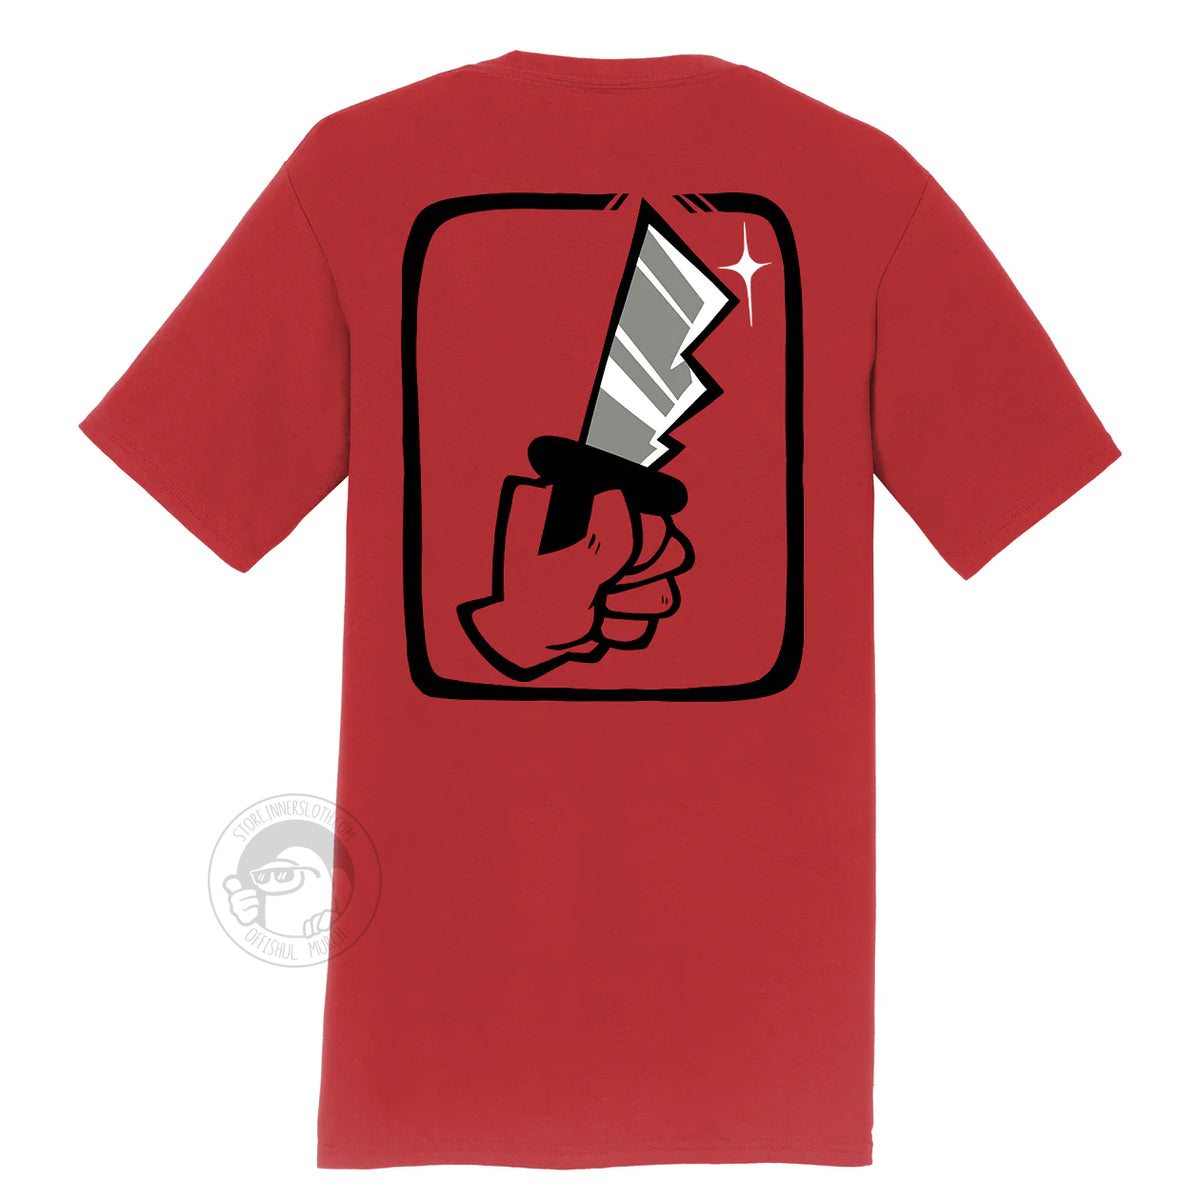 A product photo of the back of the Among Us: Shhhirt in red. The back art is a large hand holding a knife.